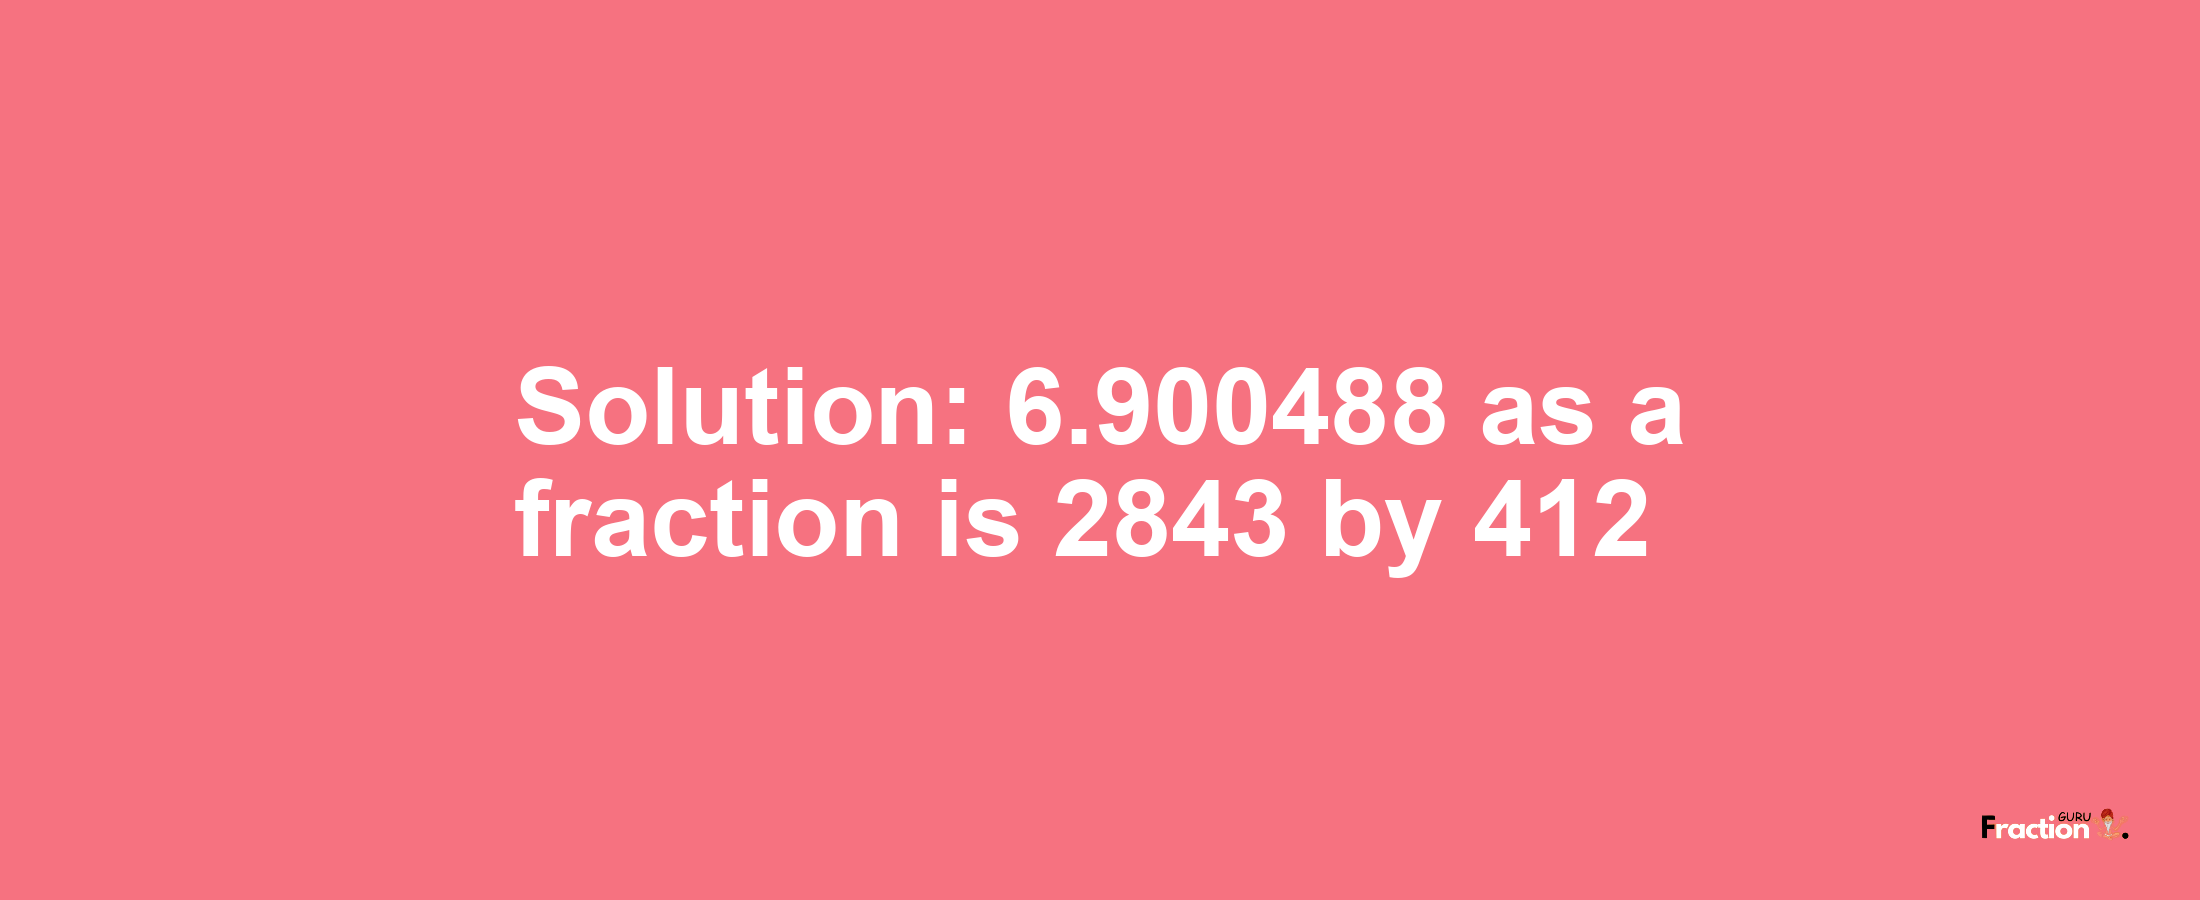 Solution:6.900488 as a fraction is 2843/412